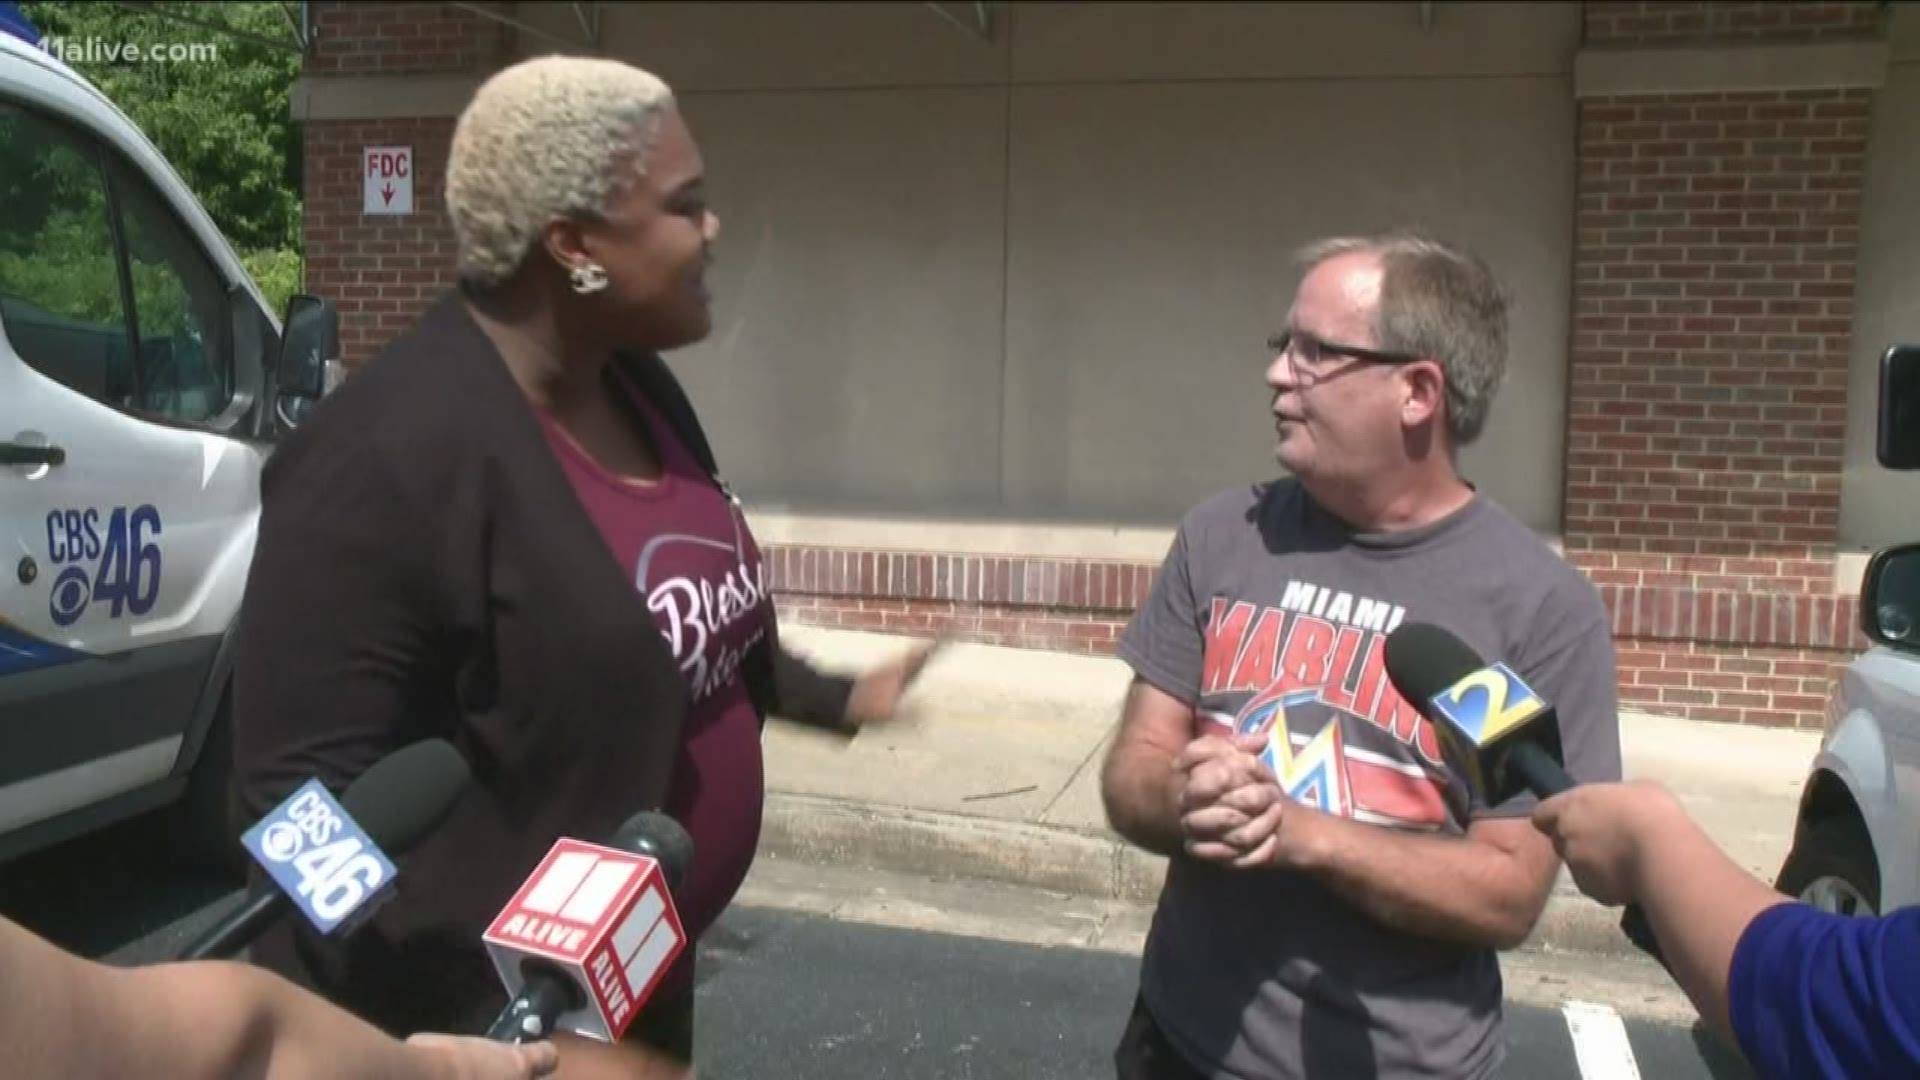 Georgia state Rep. Erica Thomas said over the weekend that a white man told her to "go back where you came from" at a supermarket, before he showed up for his own press conference to dispute that - though he admitted he did call her an expletive for using the "10 items or less" line with too many items. Thomas is pregnant and was with her child at the time.